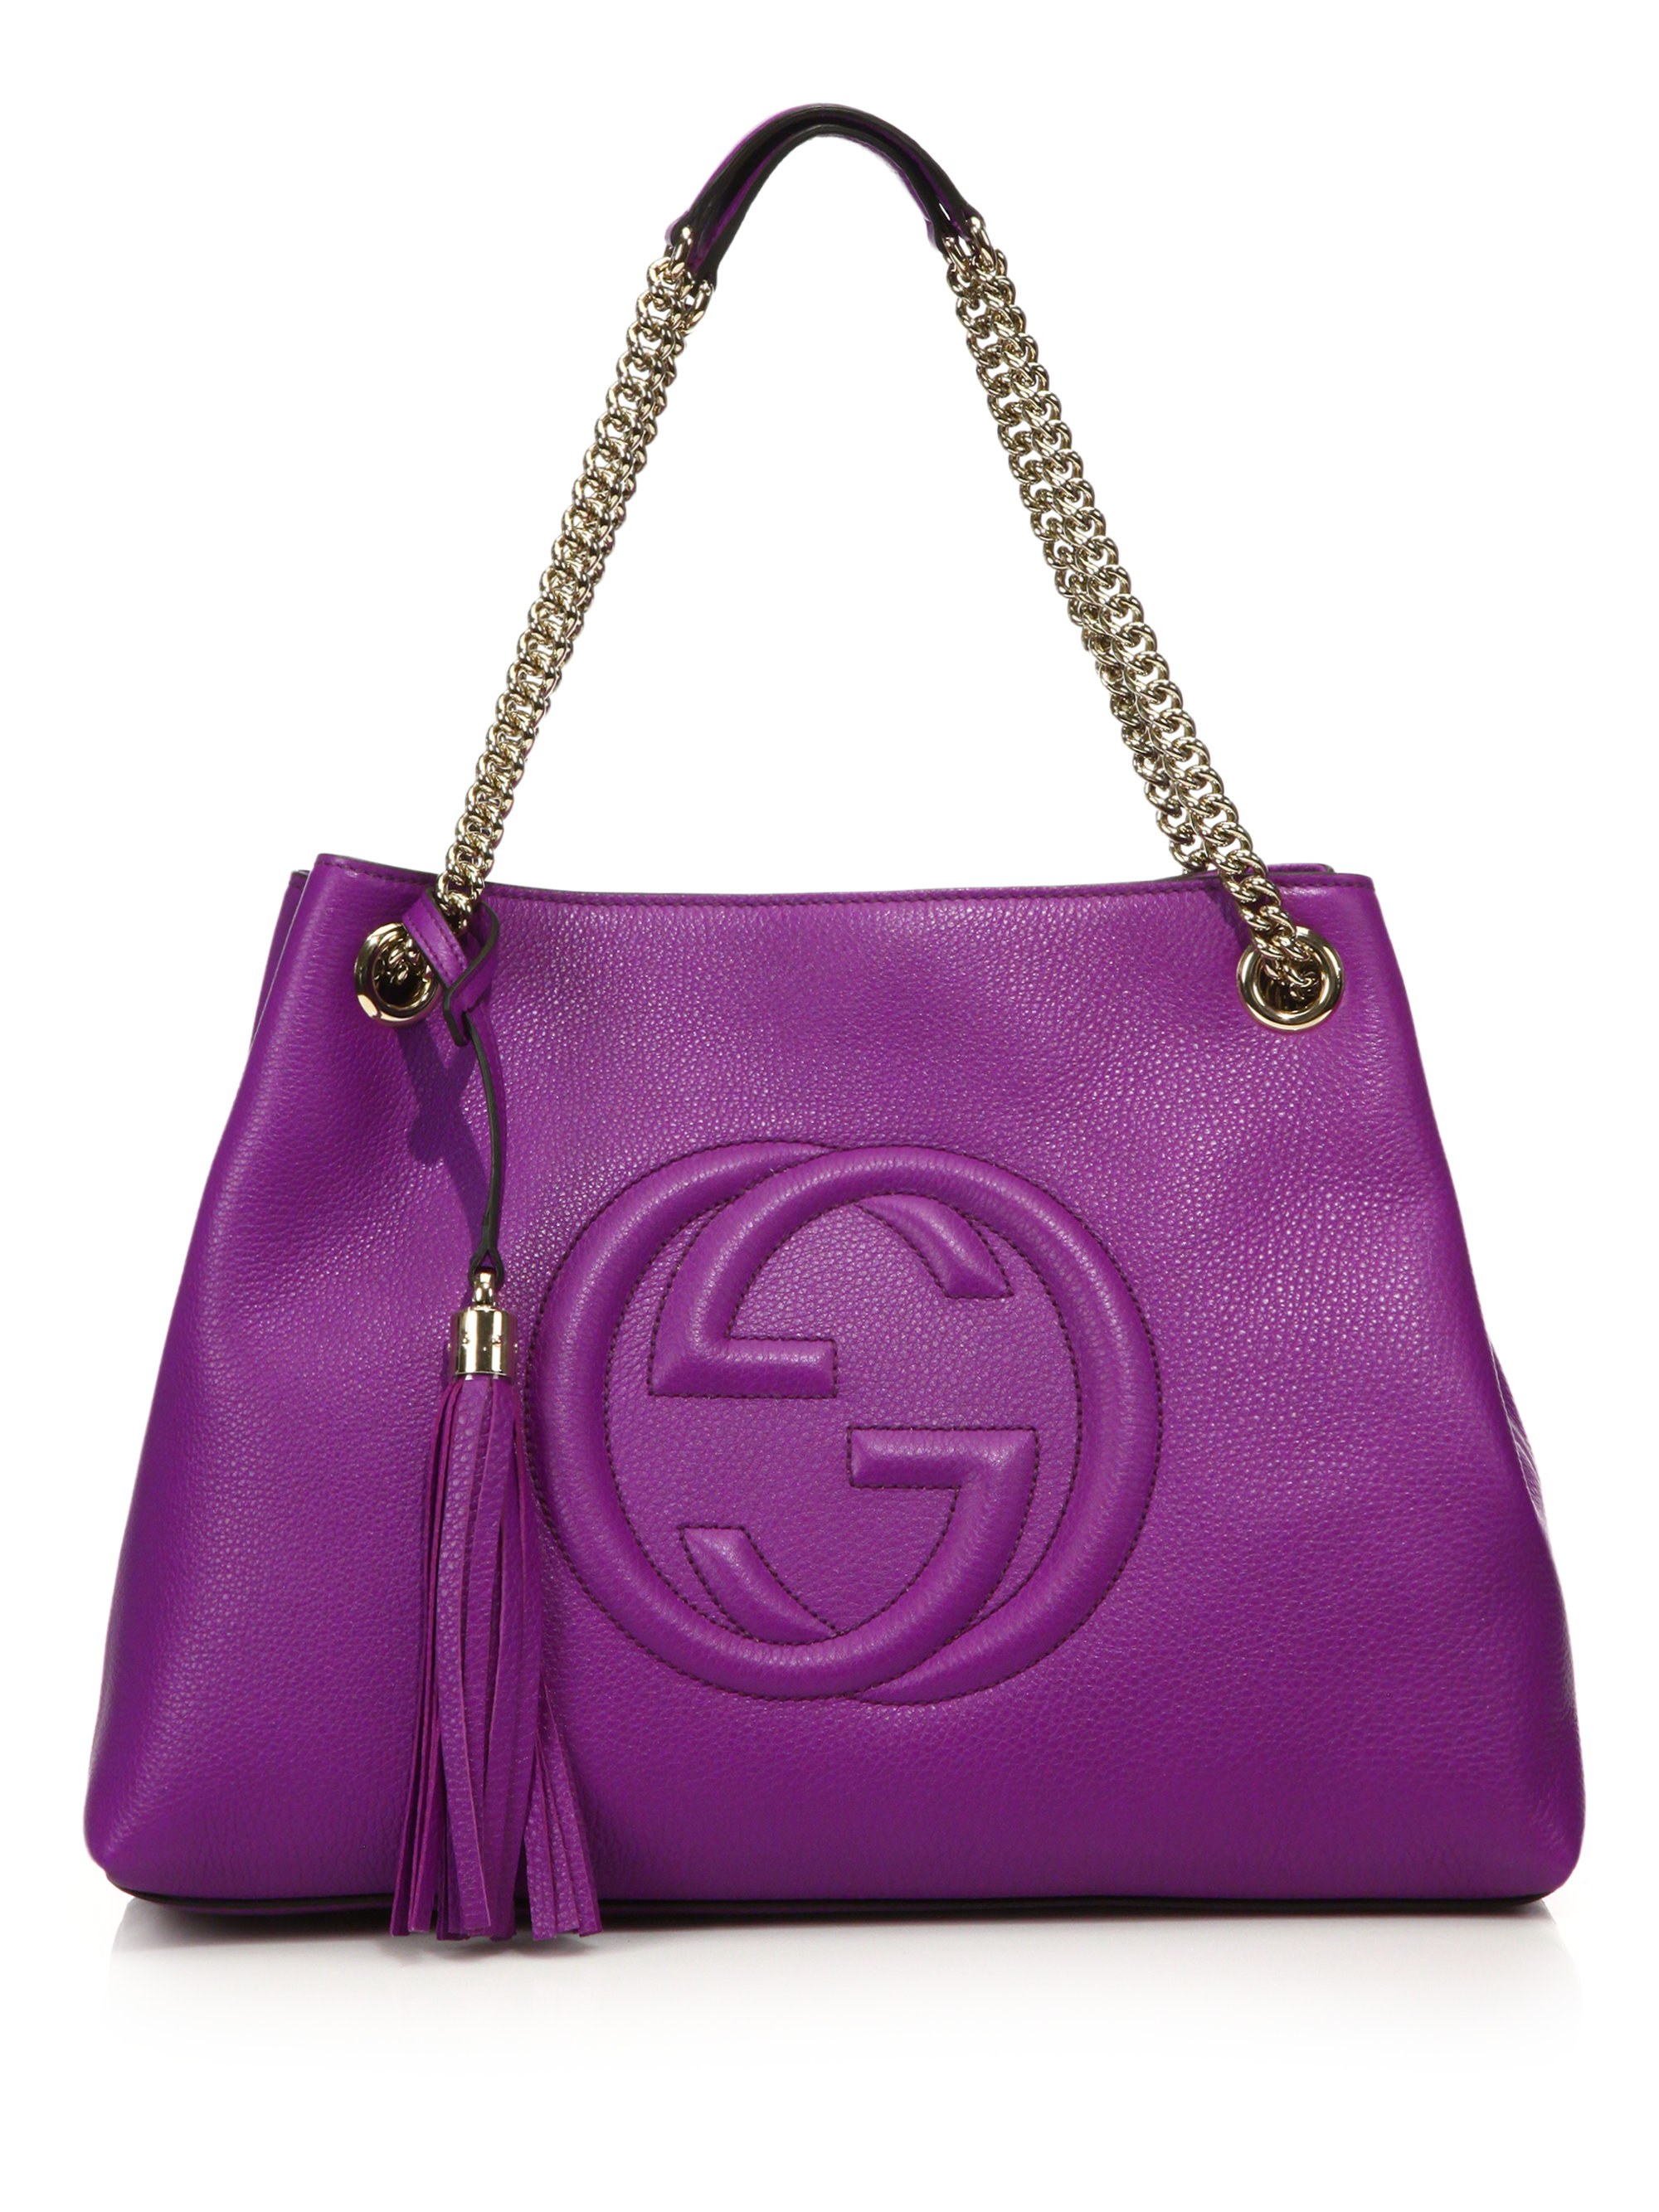 Lyst - Gucci Soho Leather Shoulder Bag in Purple